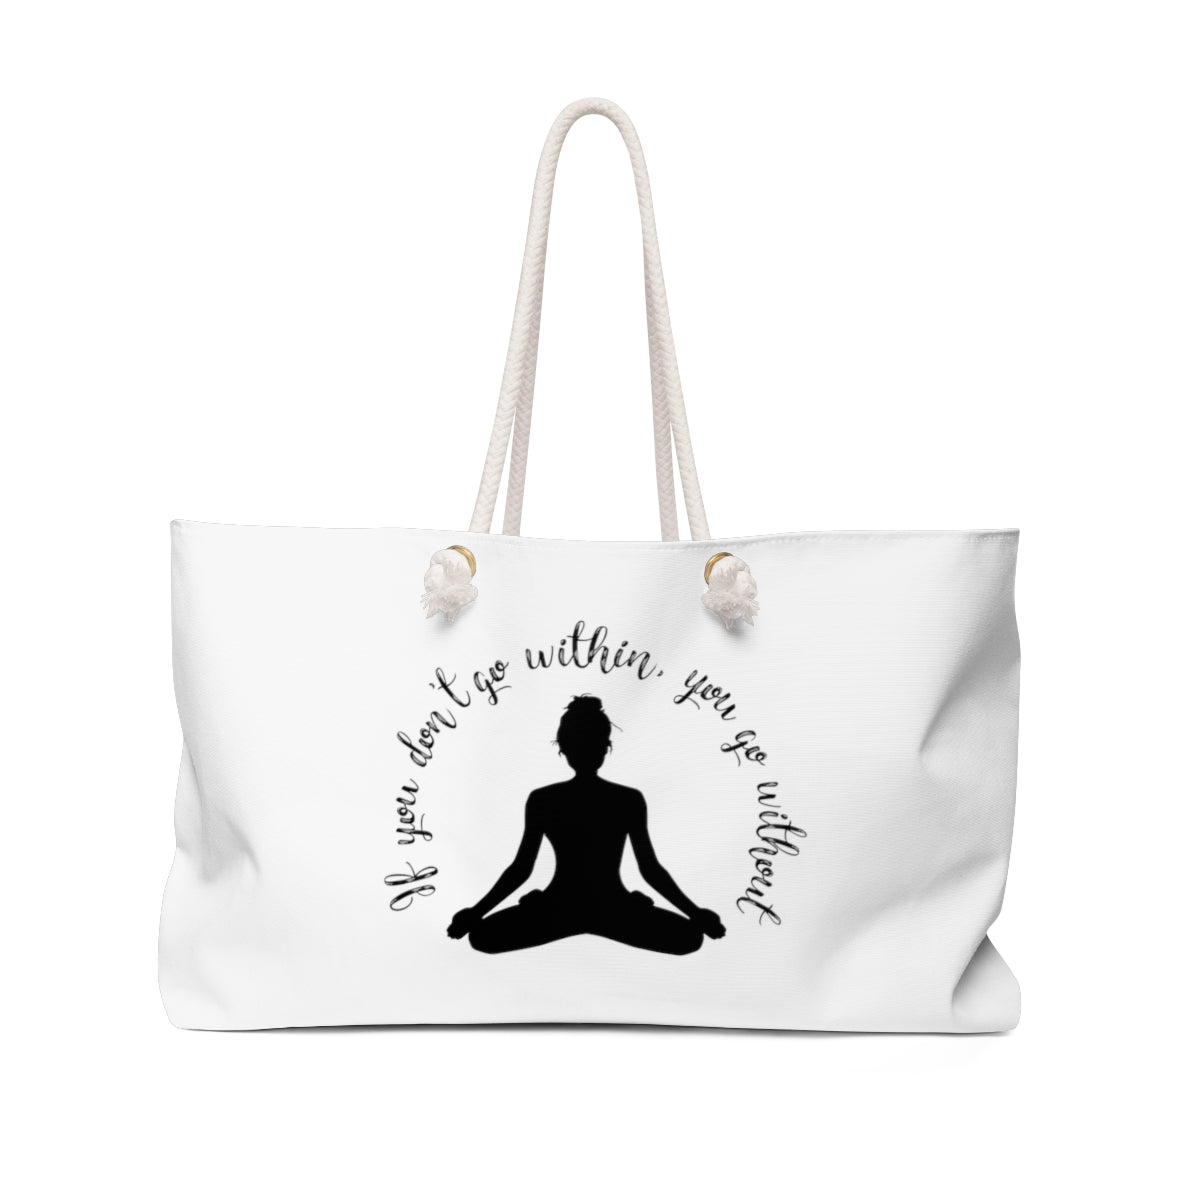 Yoga - Within Without - B - Weekender Bag